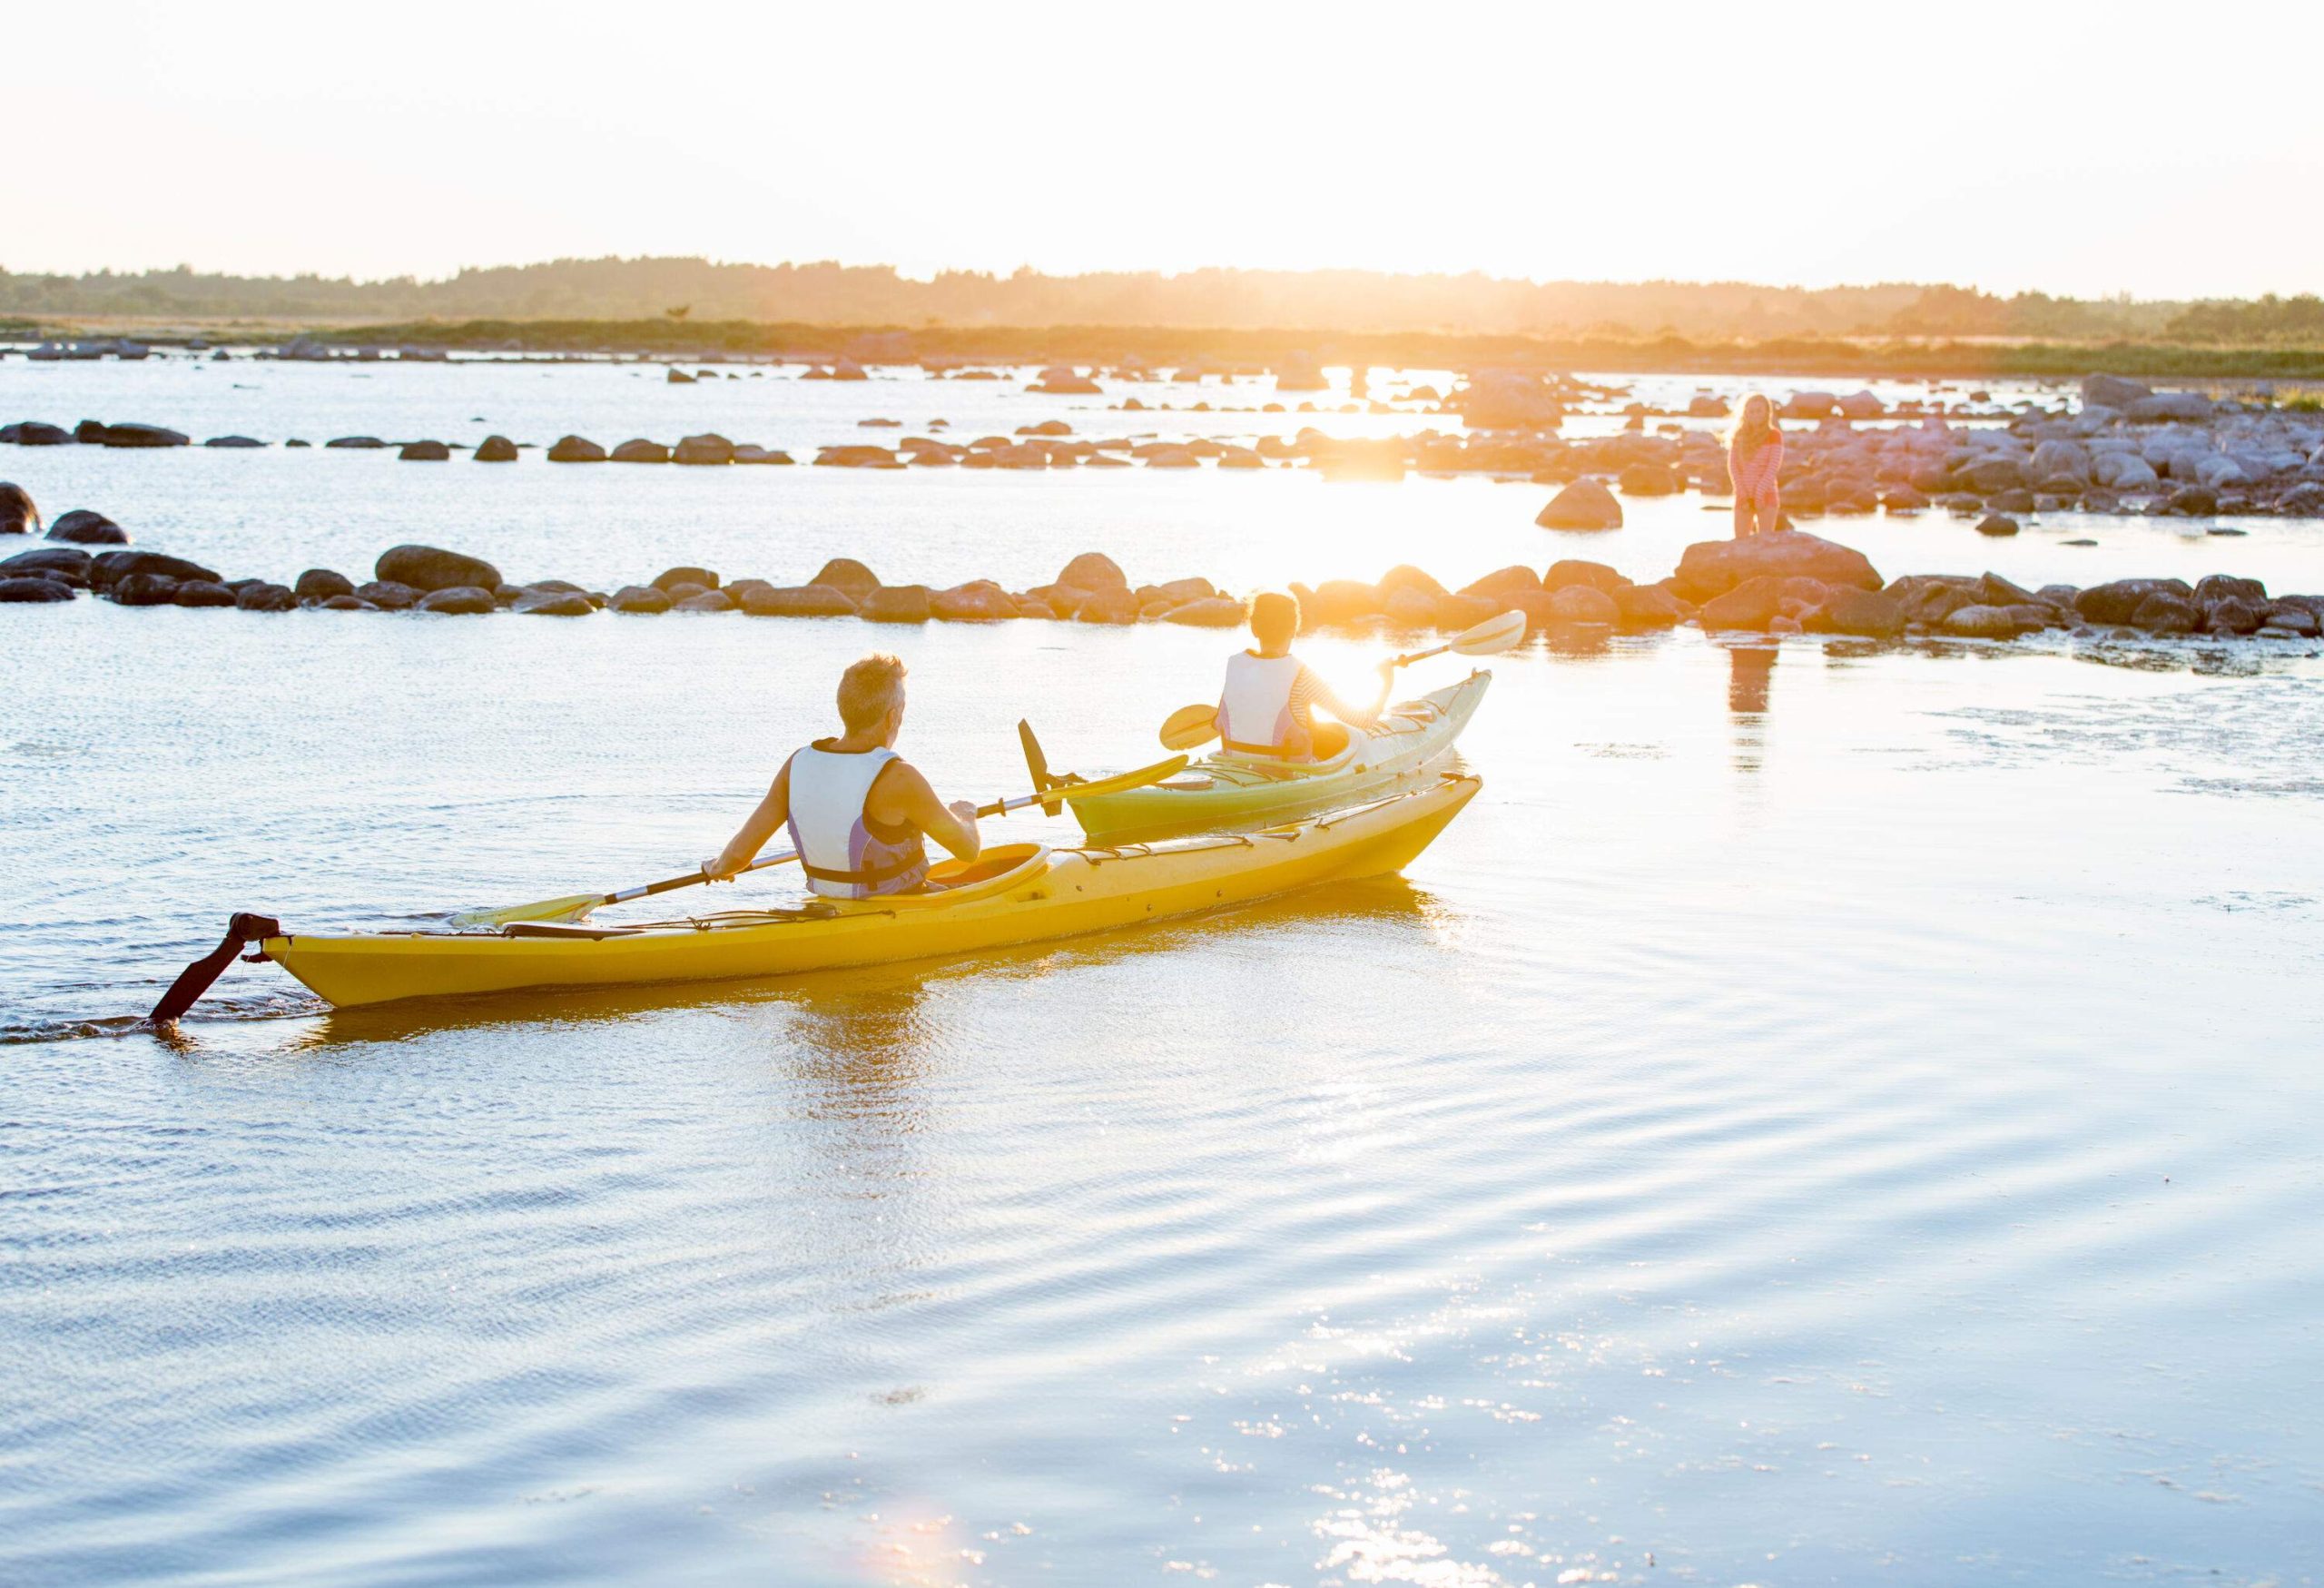 Two people kayaking in the sea close to the shore as the evening light shines on.